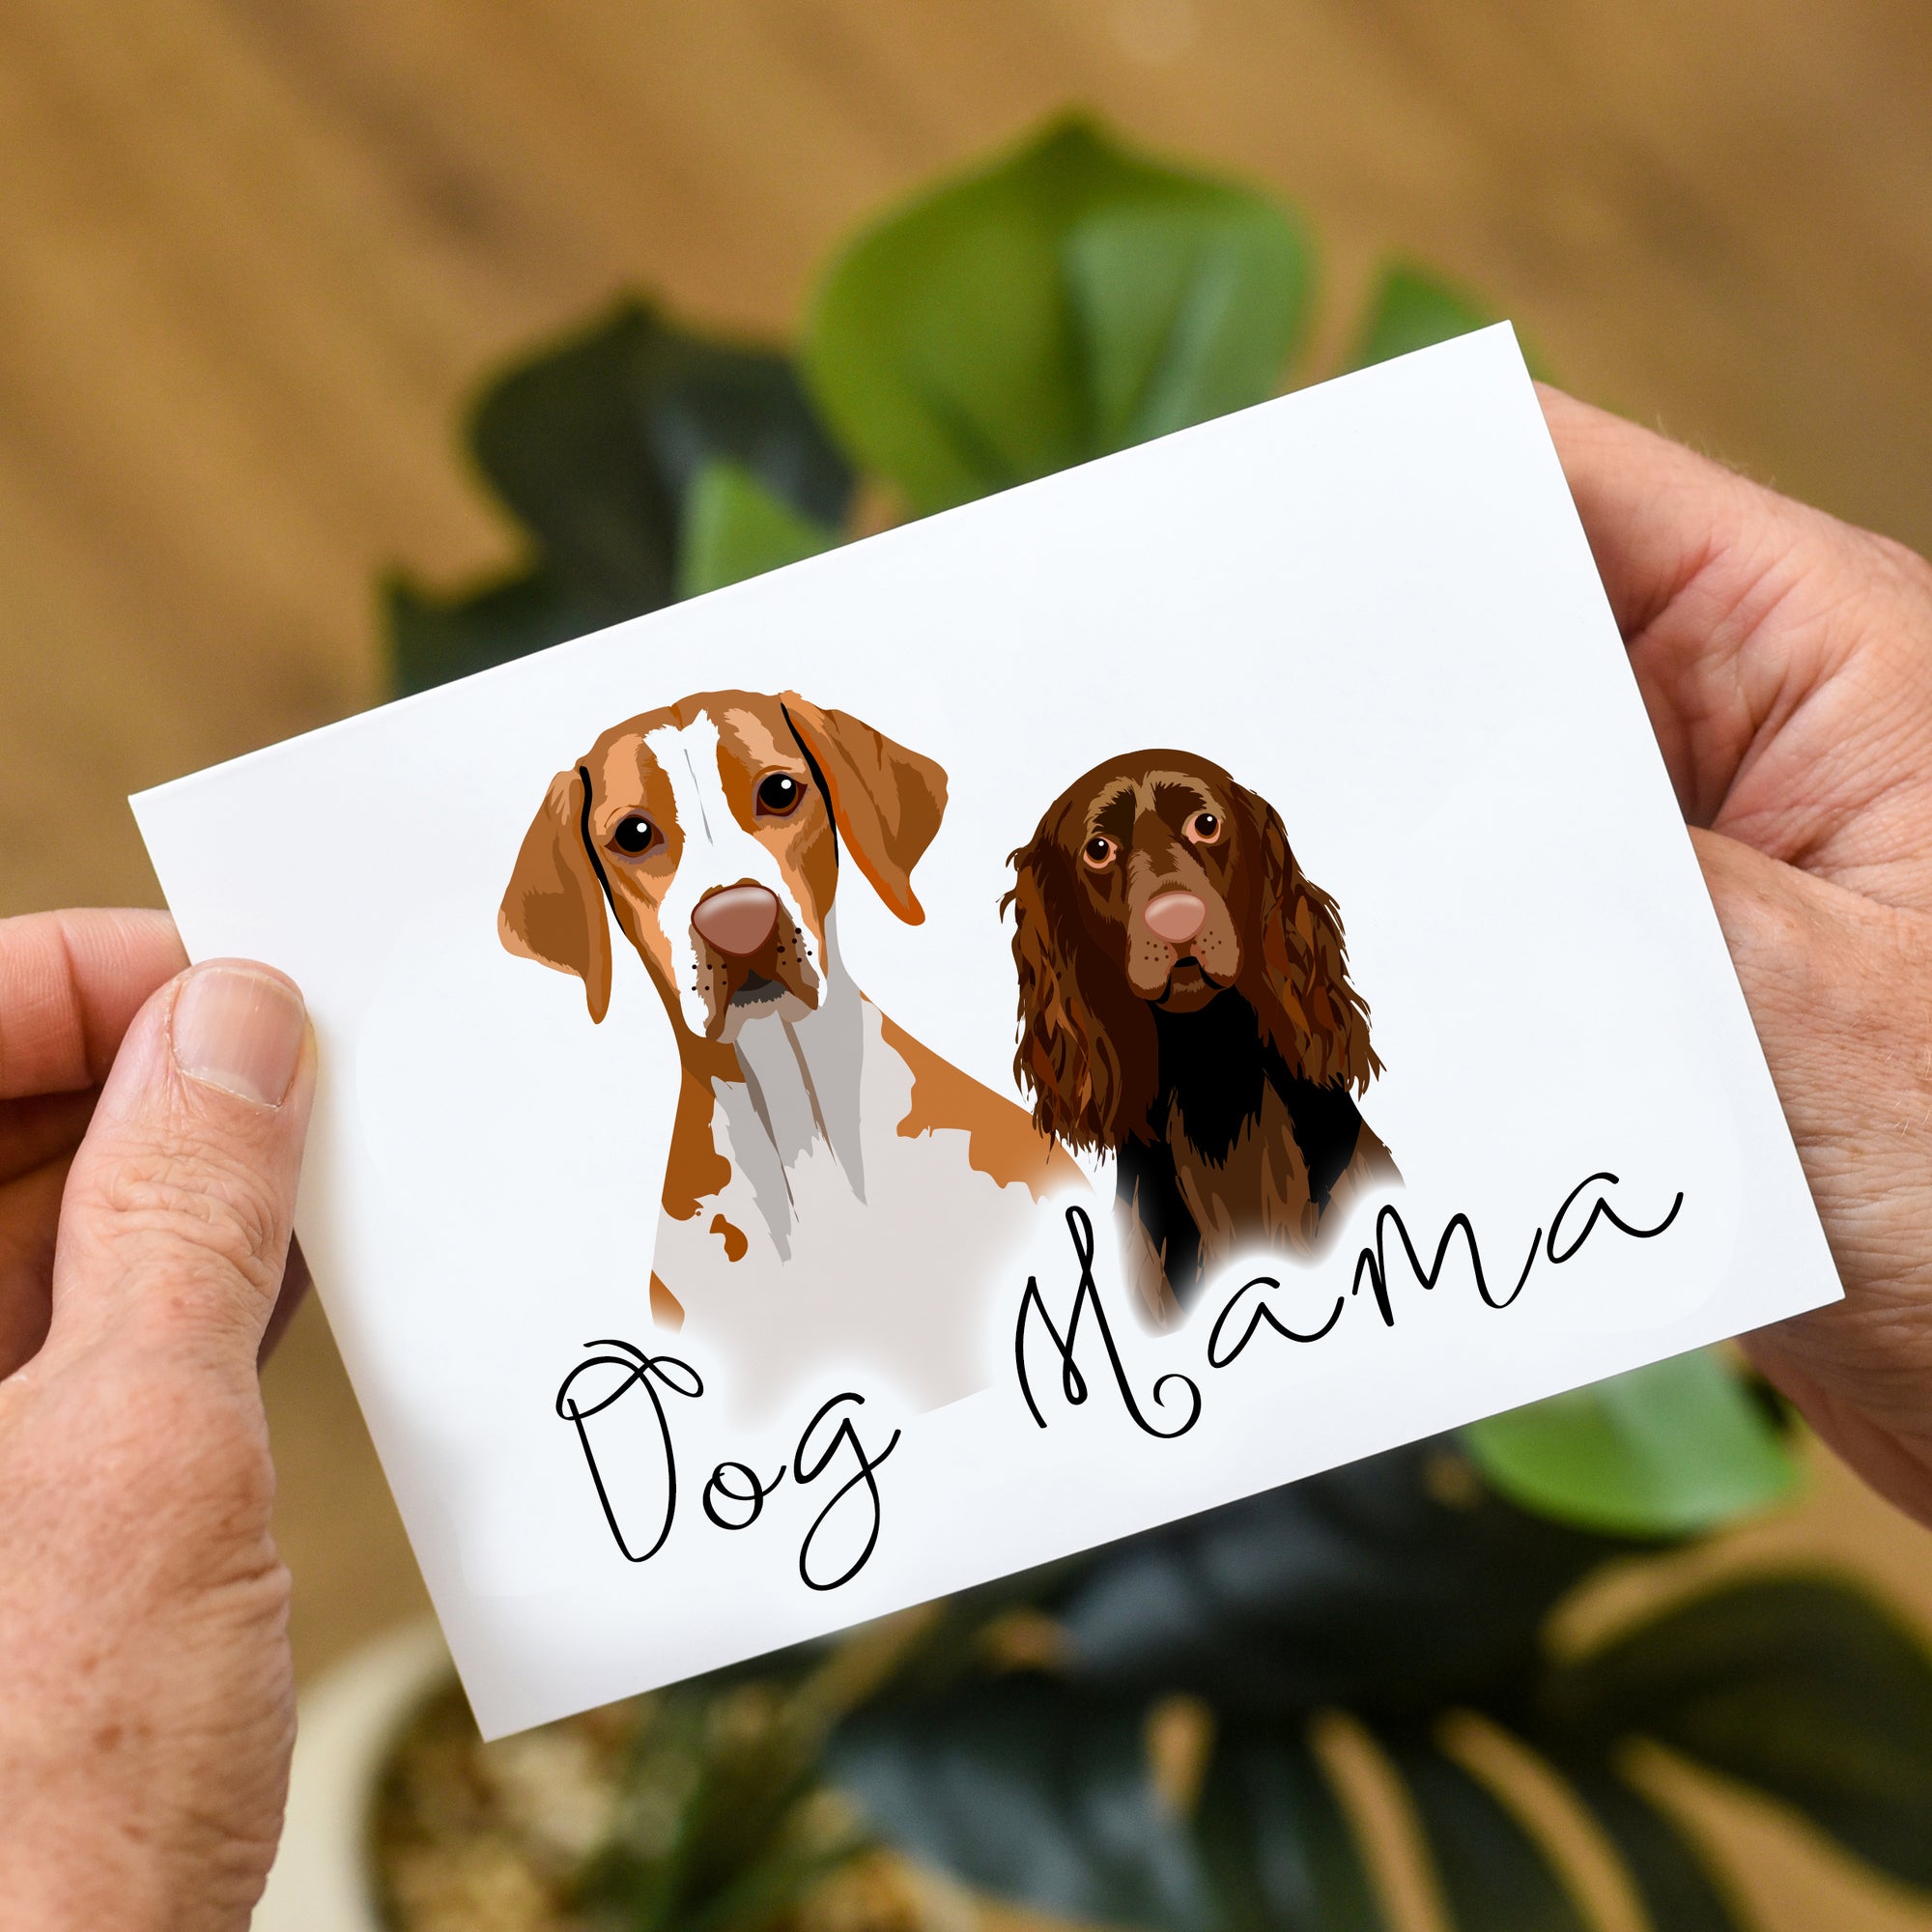 Dog Mama Card - Mother's Day Card for Dog Mums